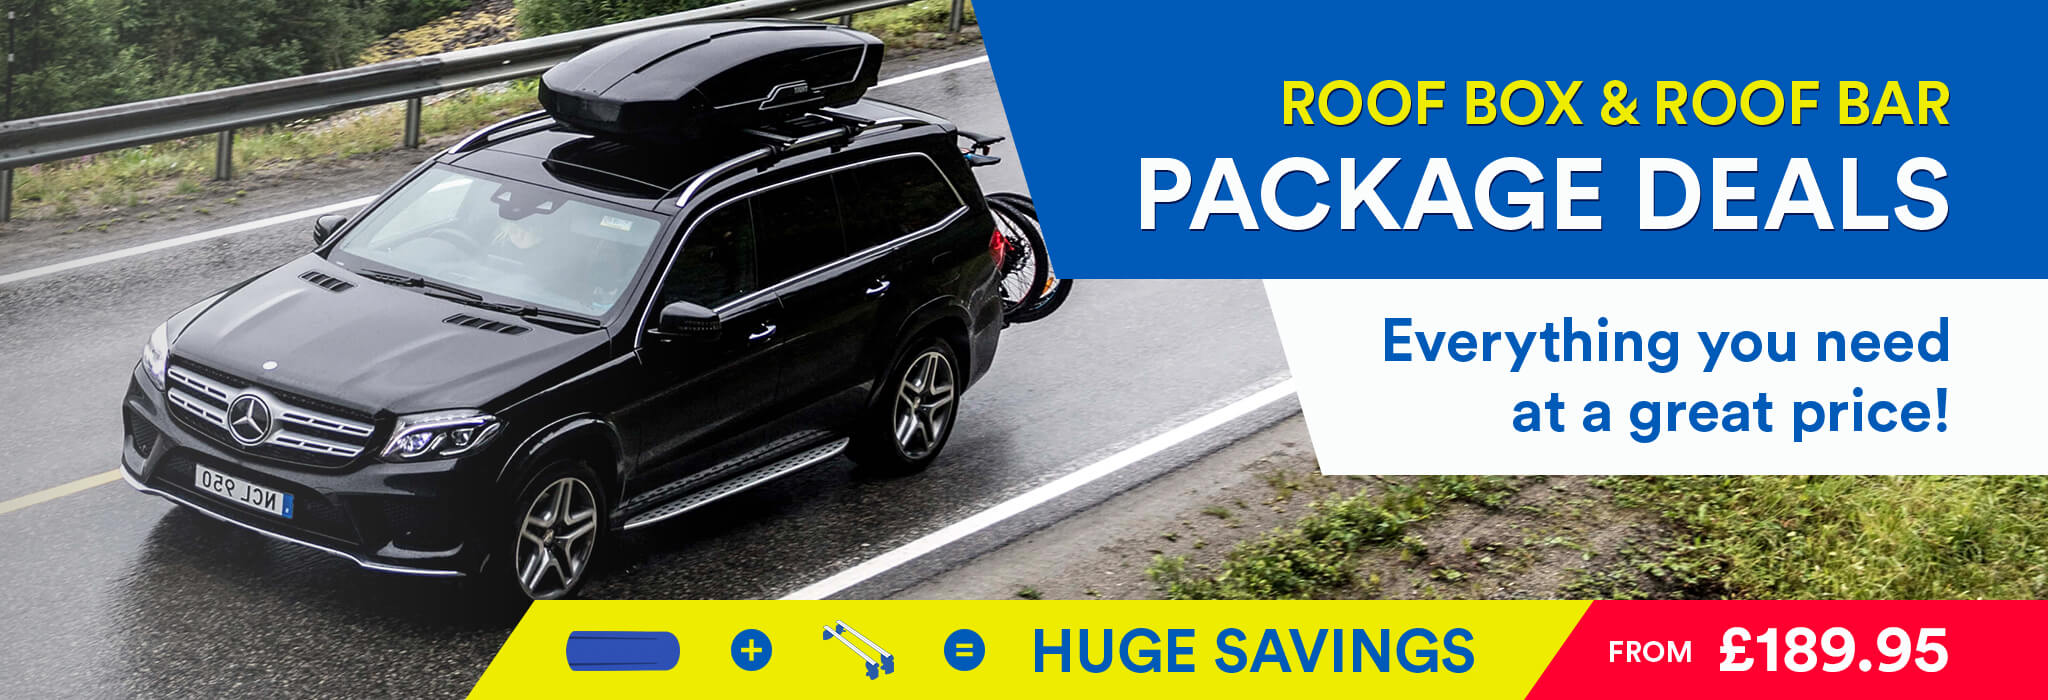 Roof Box & Bars Package Deals: Save when you buy your roof box and roof bars together